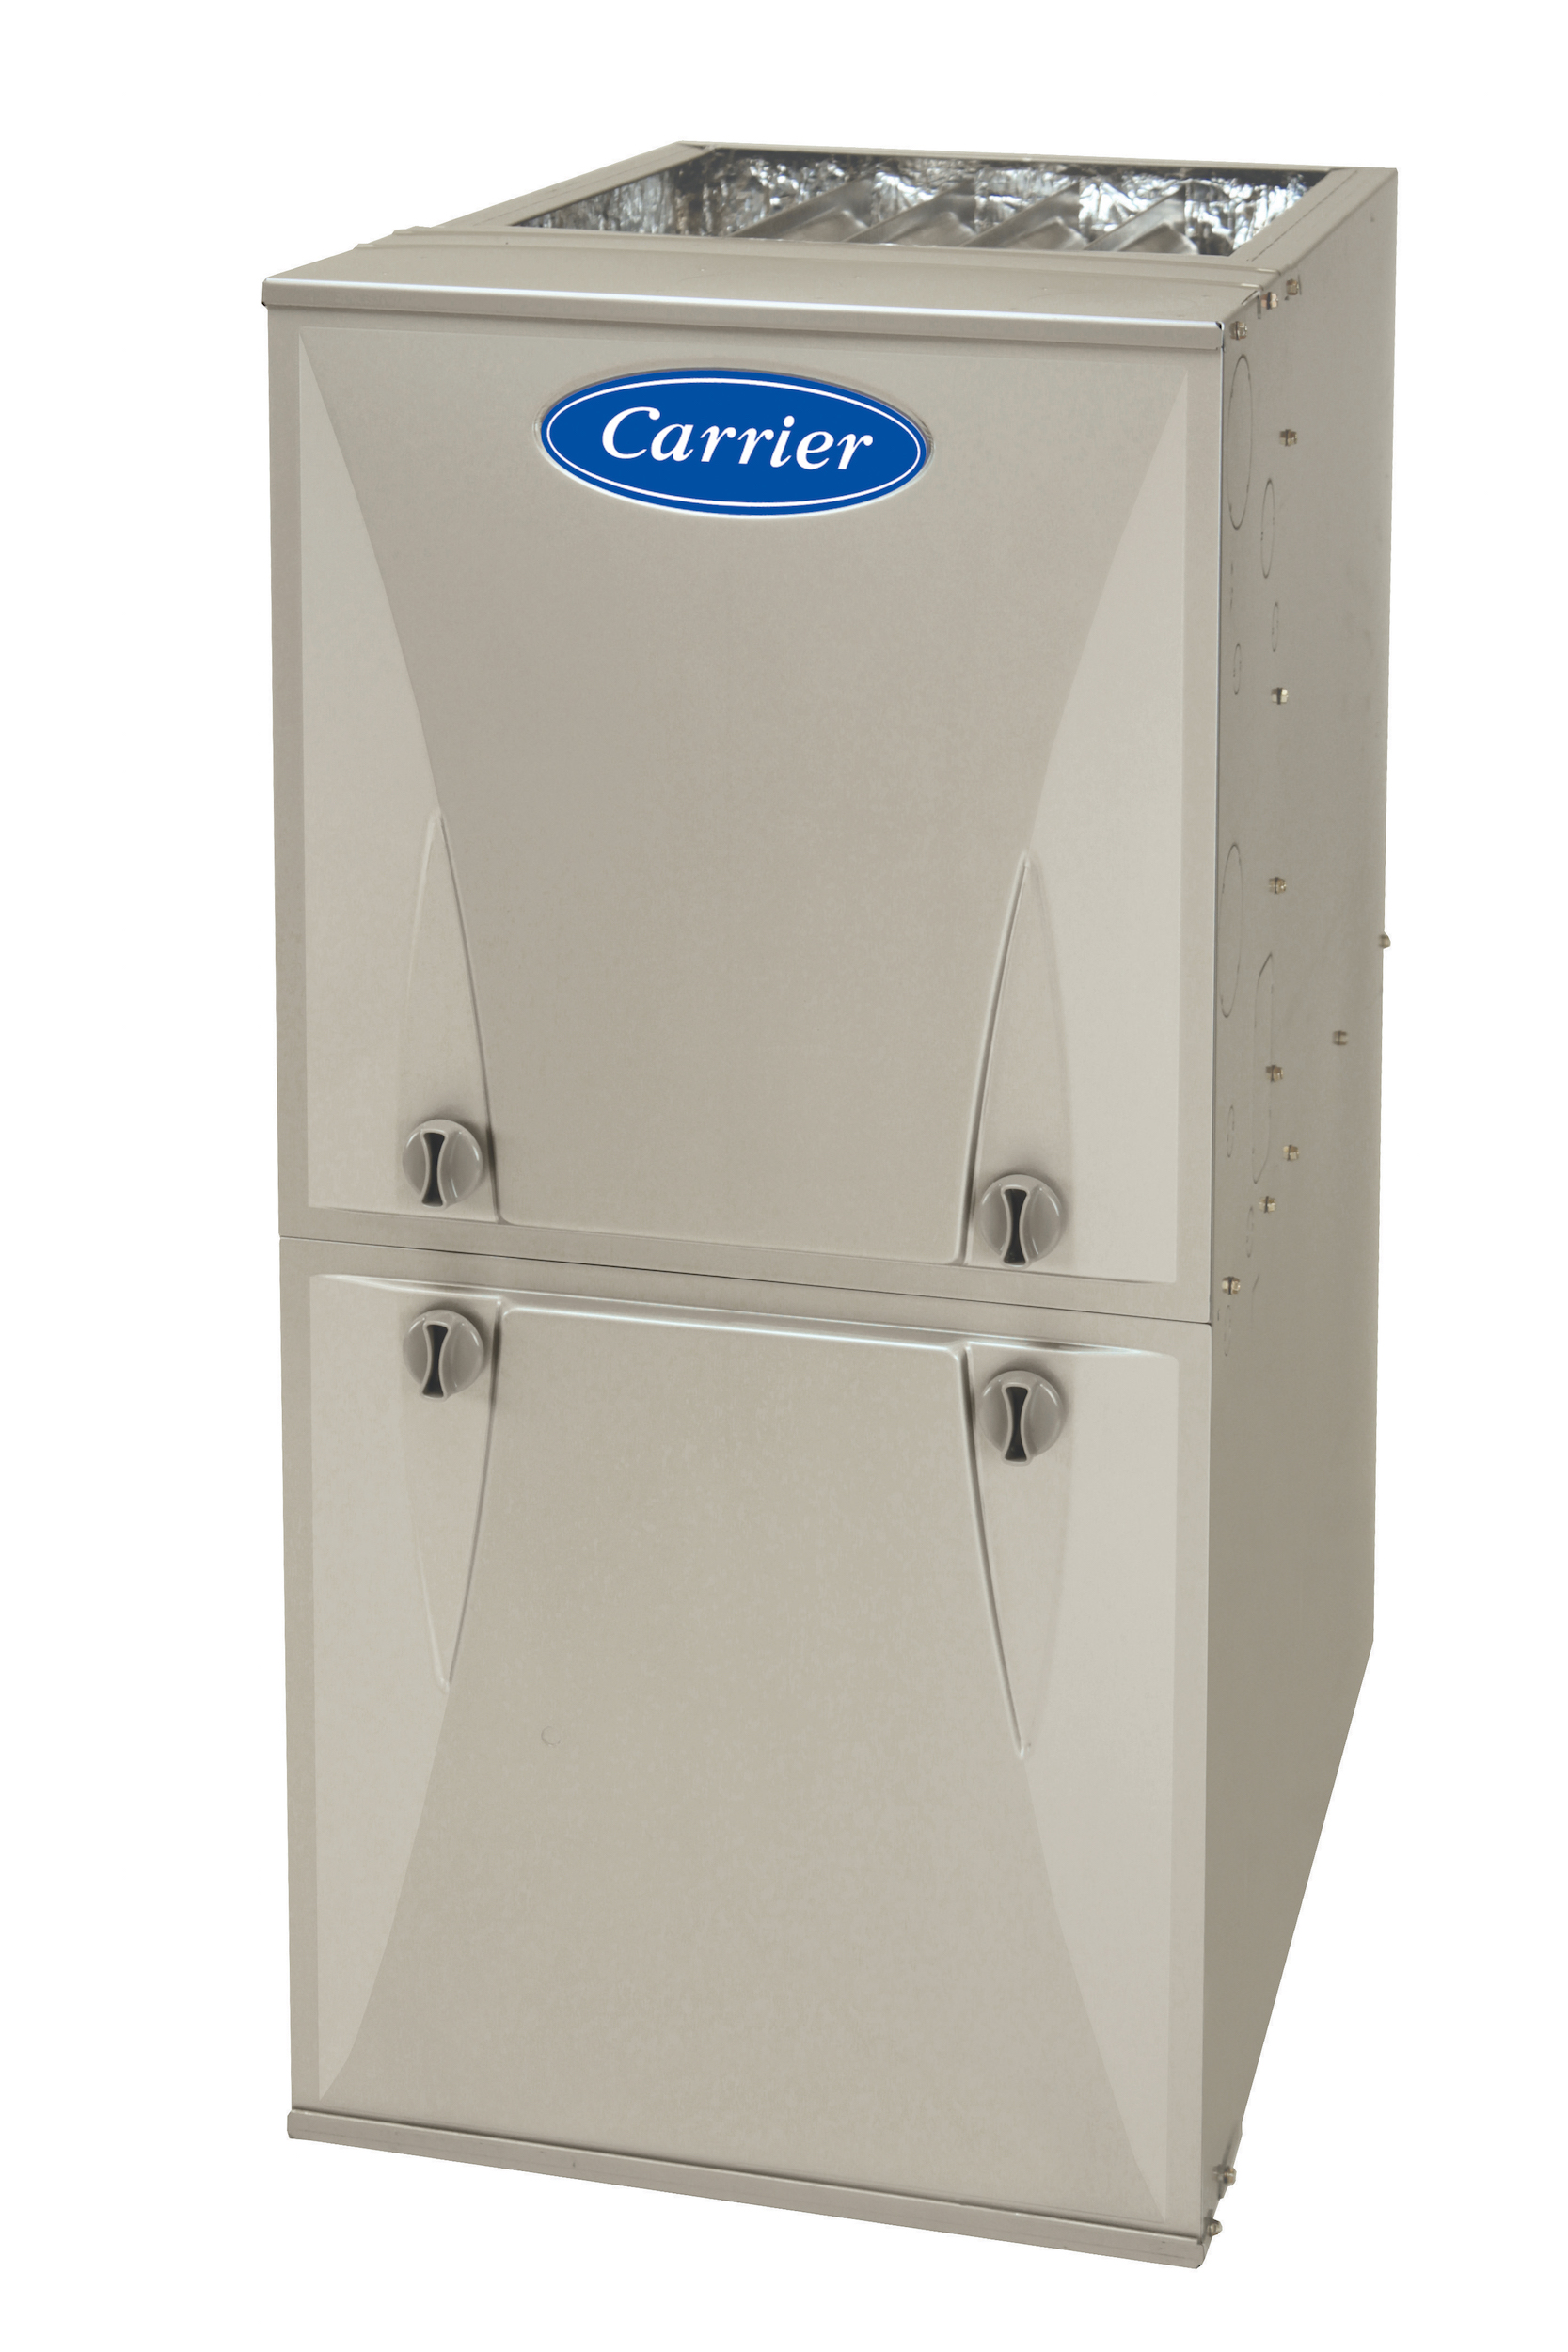 carrier-high-efficiency-furnaces-comfort-care